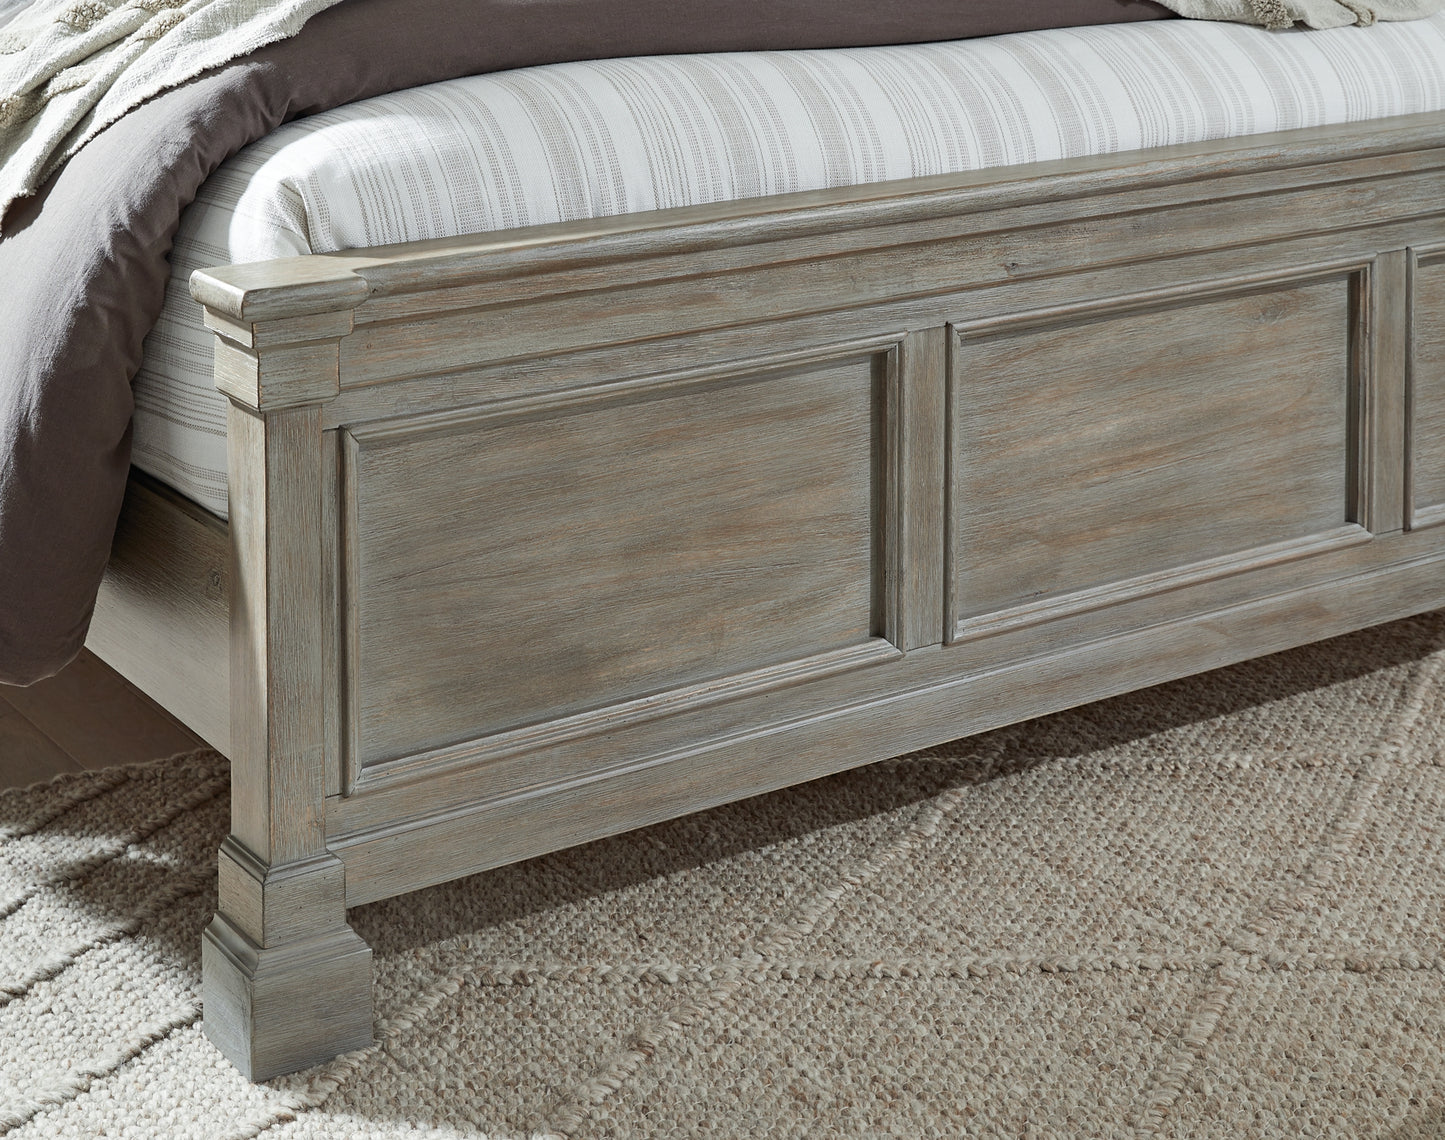 Moreshire King Panel Bed